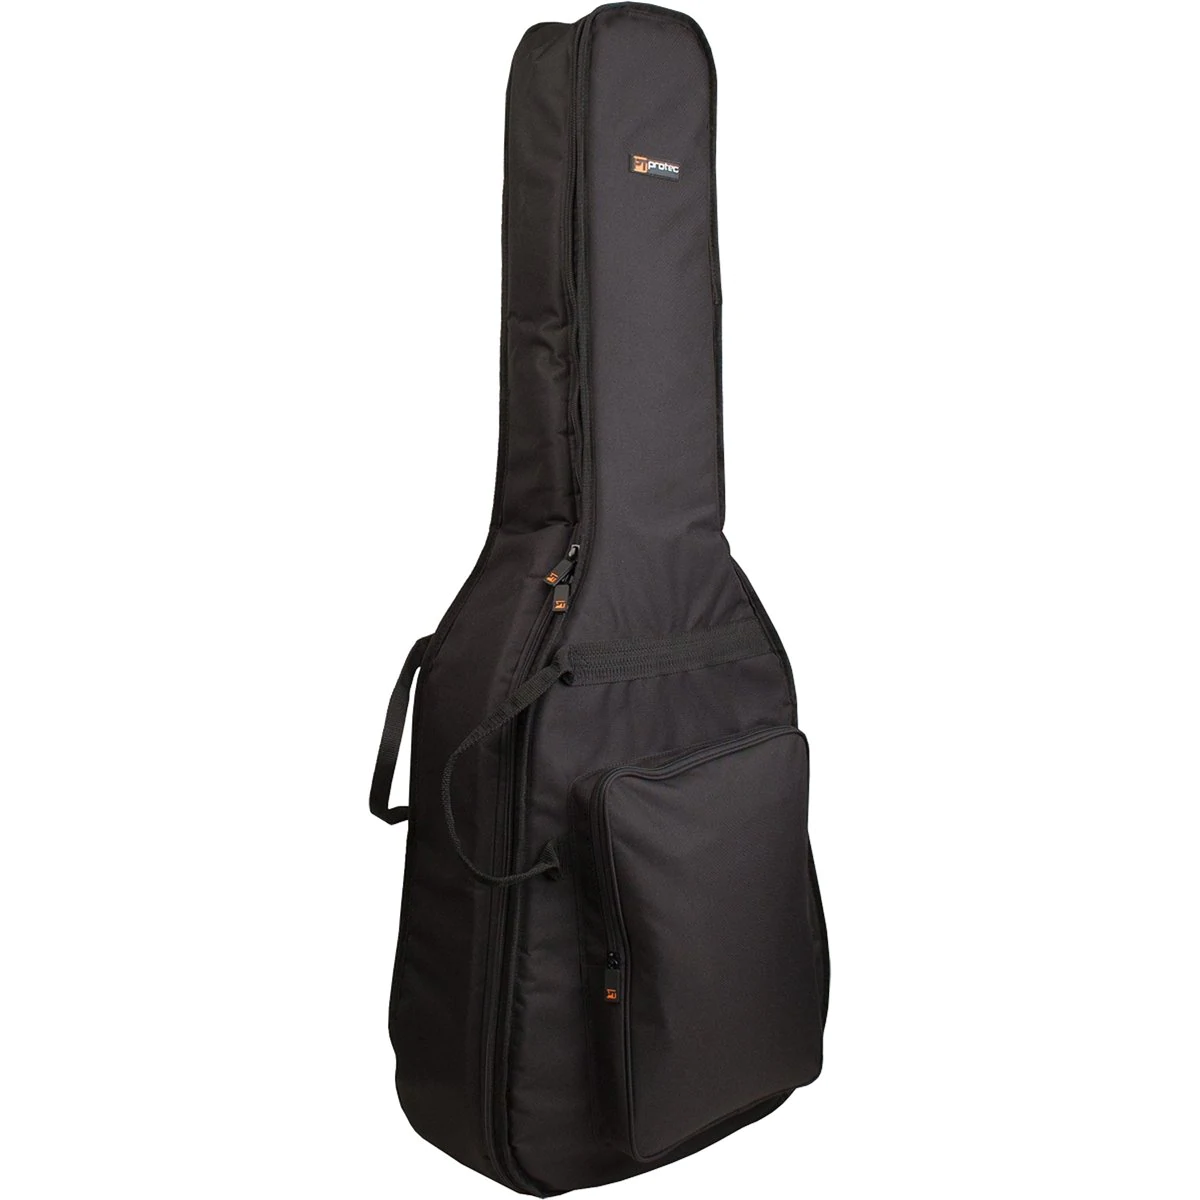 PROTEC 3/4 Acoustic Gig Bag - Silver Series